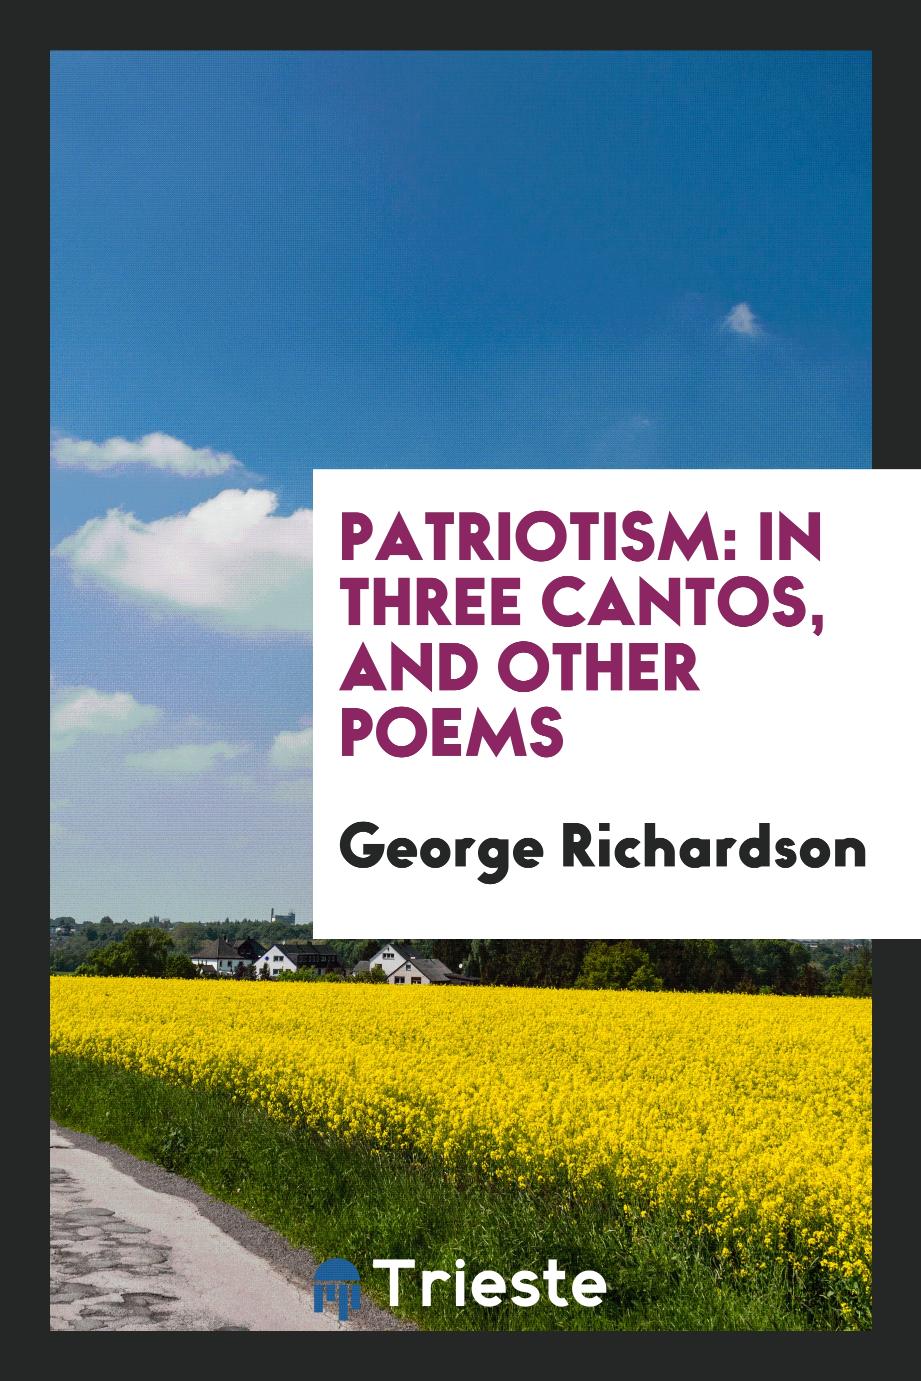 Patriotism: In Three Cantos, and Other Poems